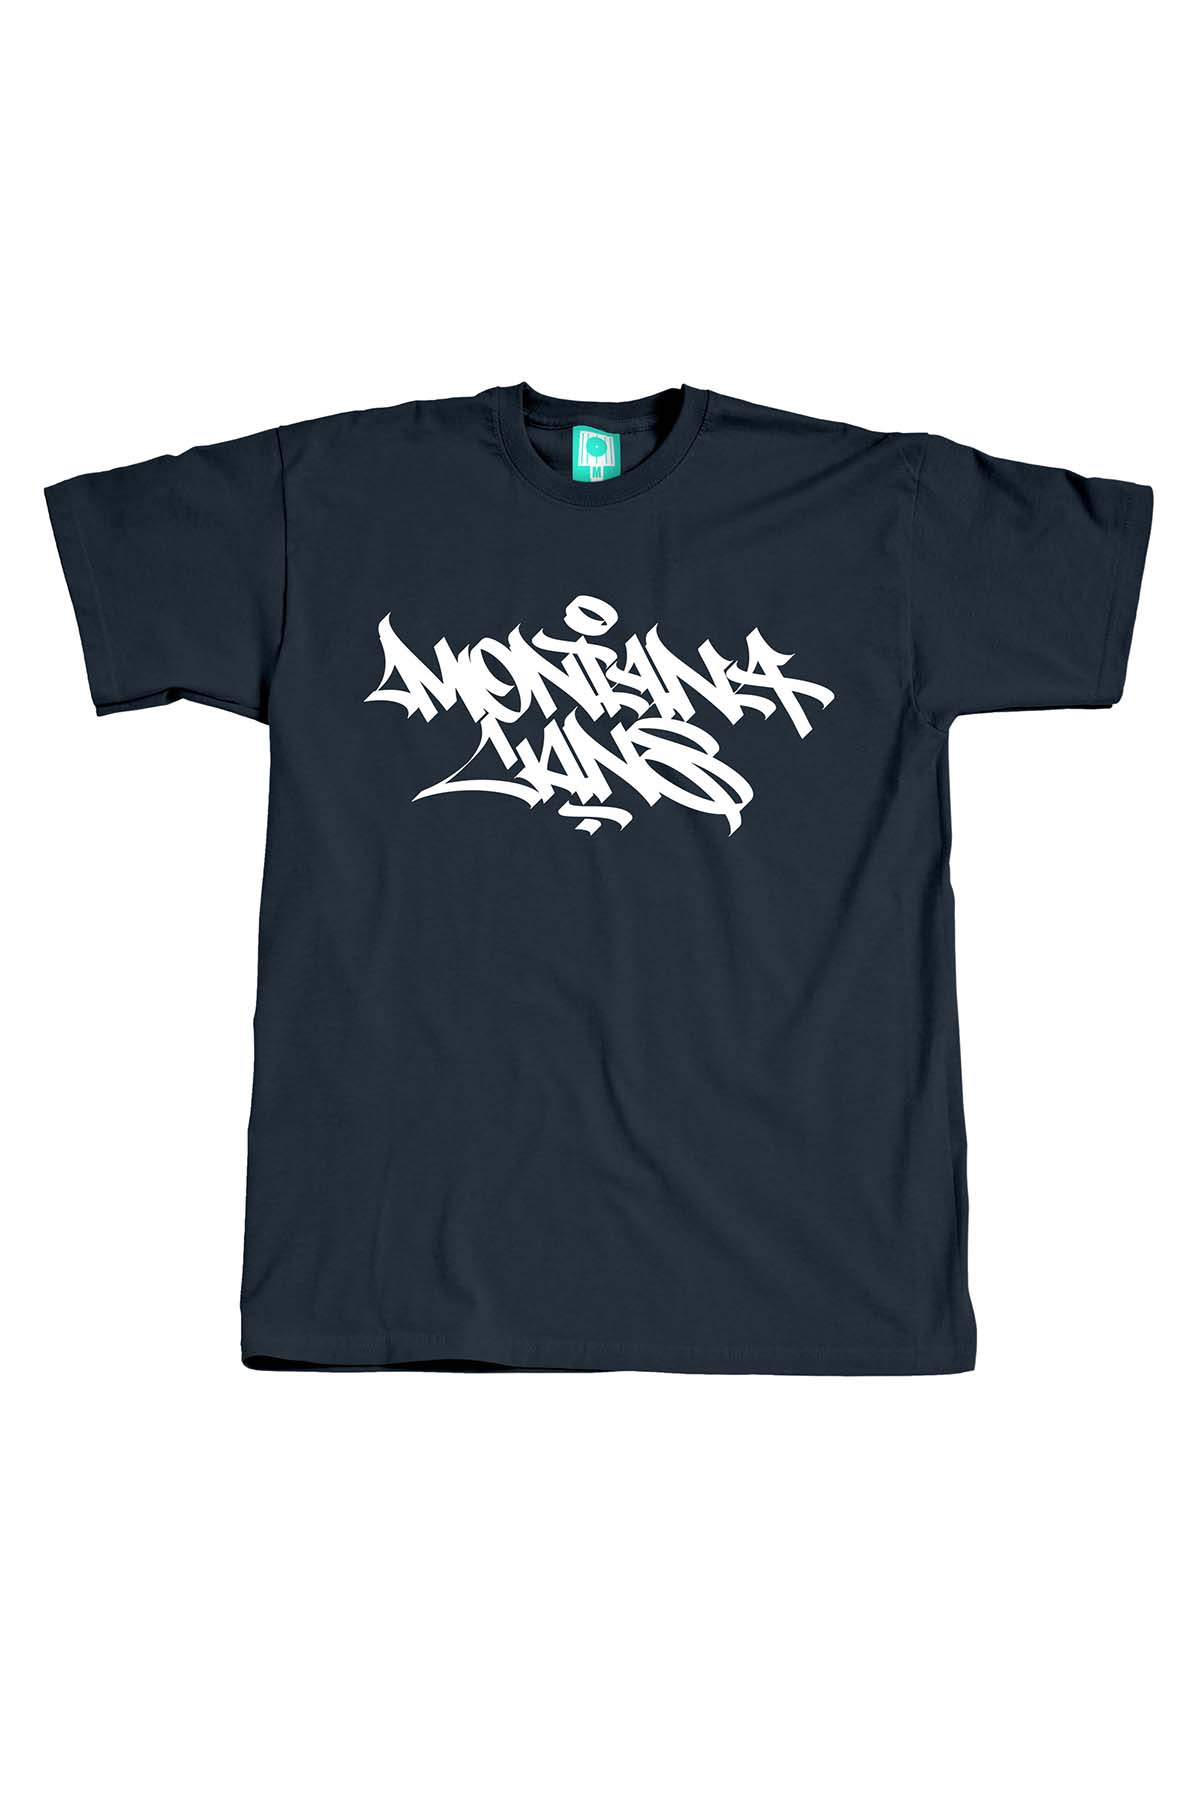 Montana MC HANDSTYLE T-Shirt by Itchie